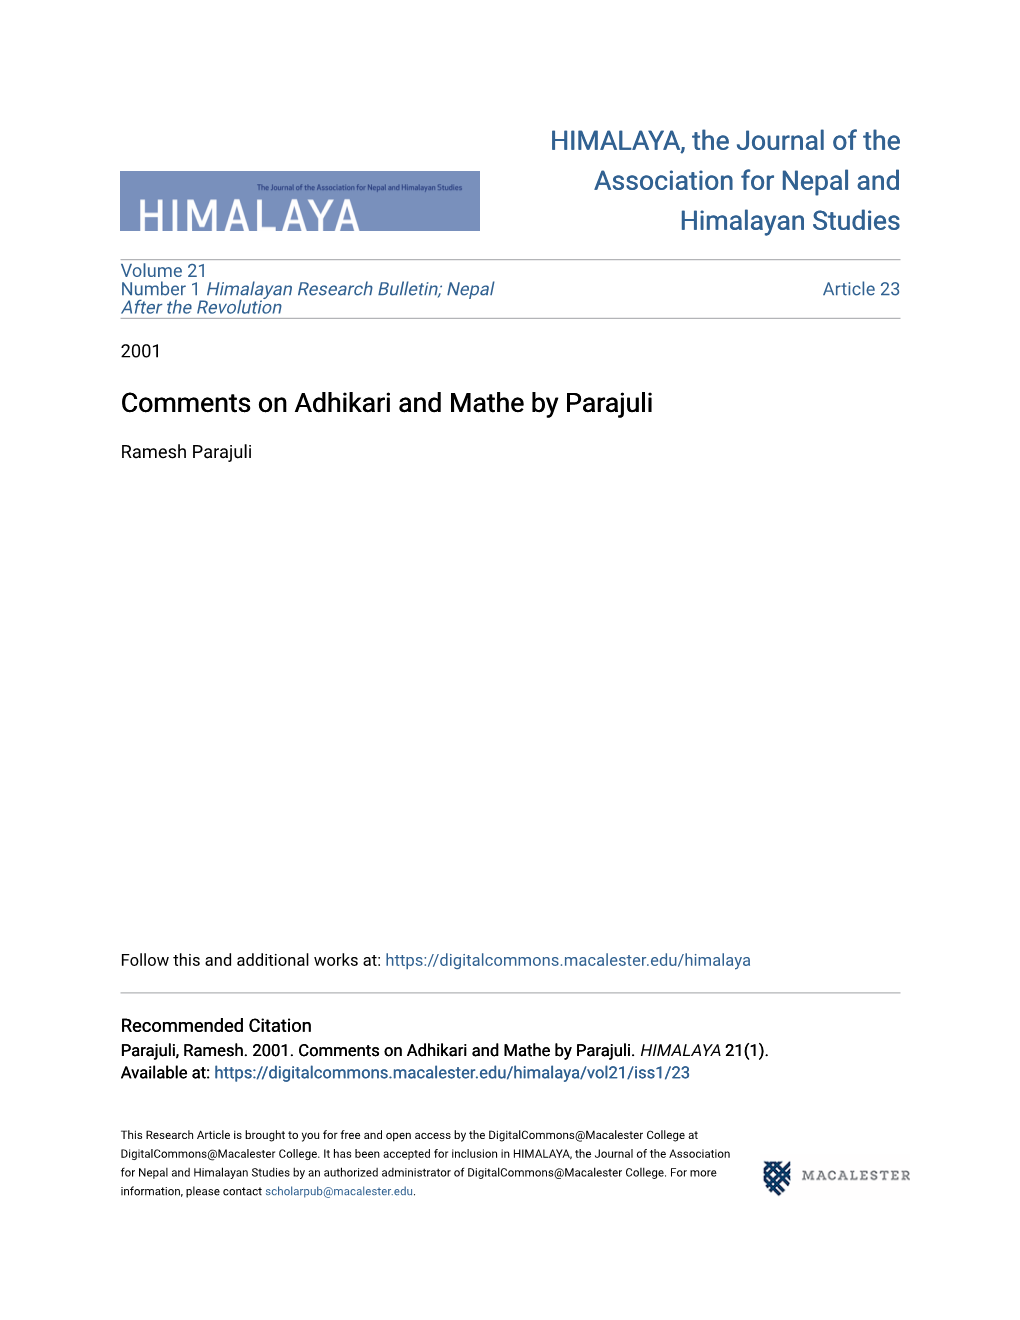 Comments on Adhikari and Mathe by Parajuli